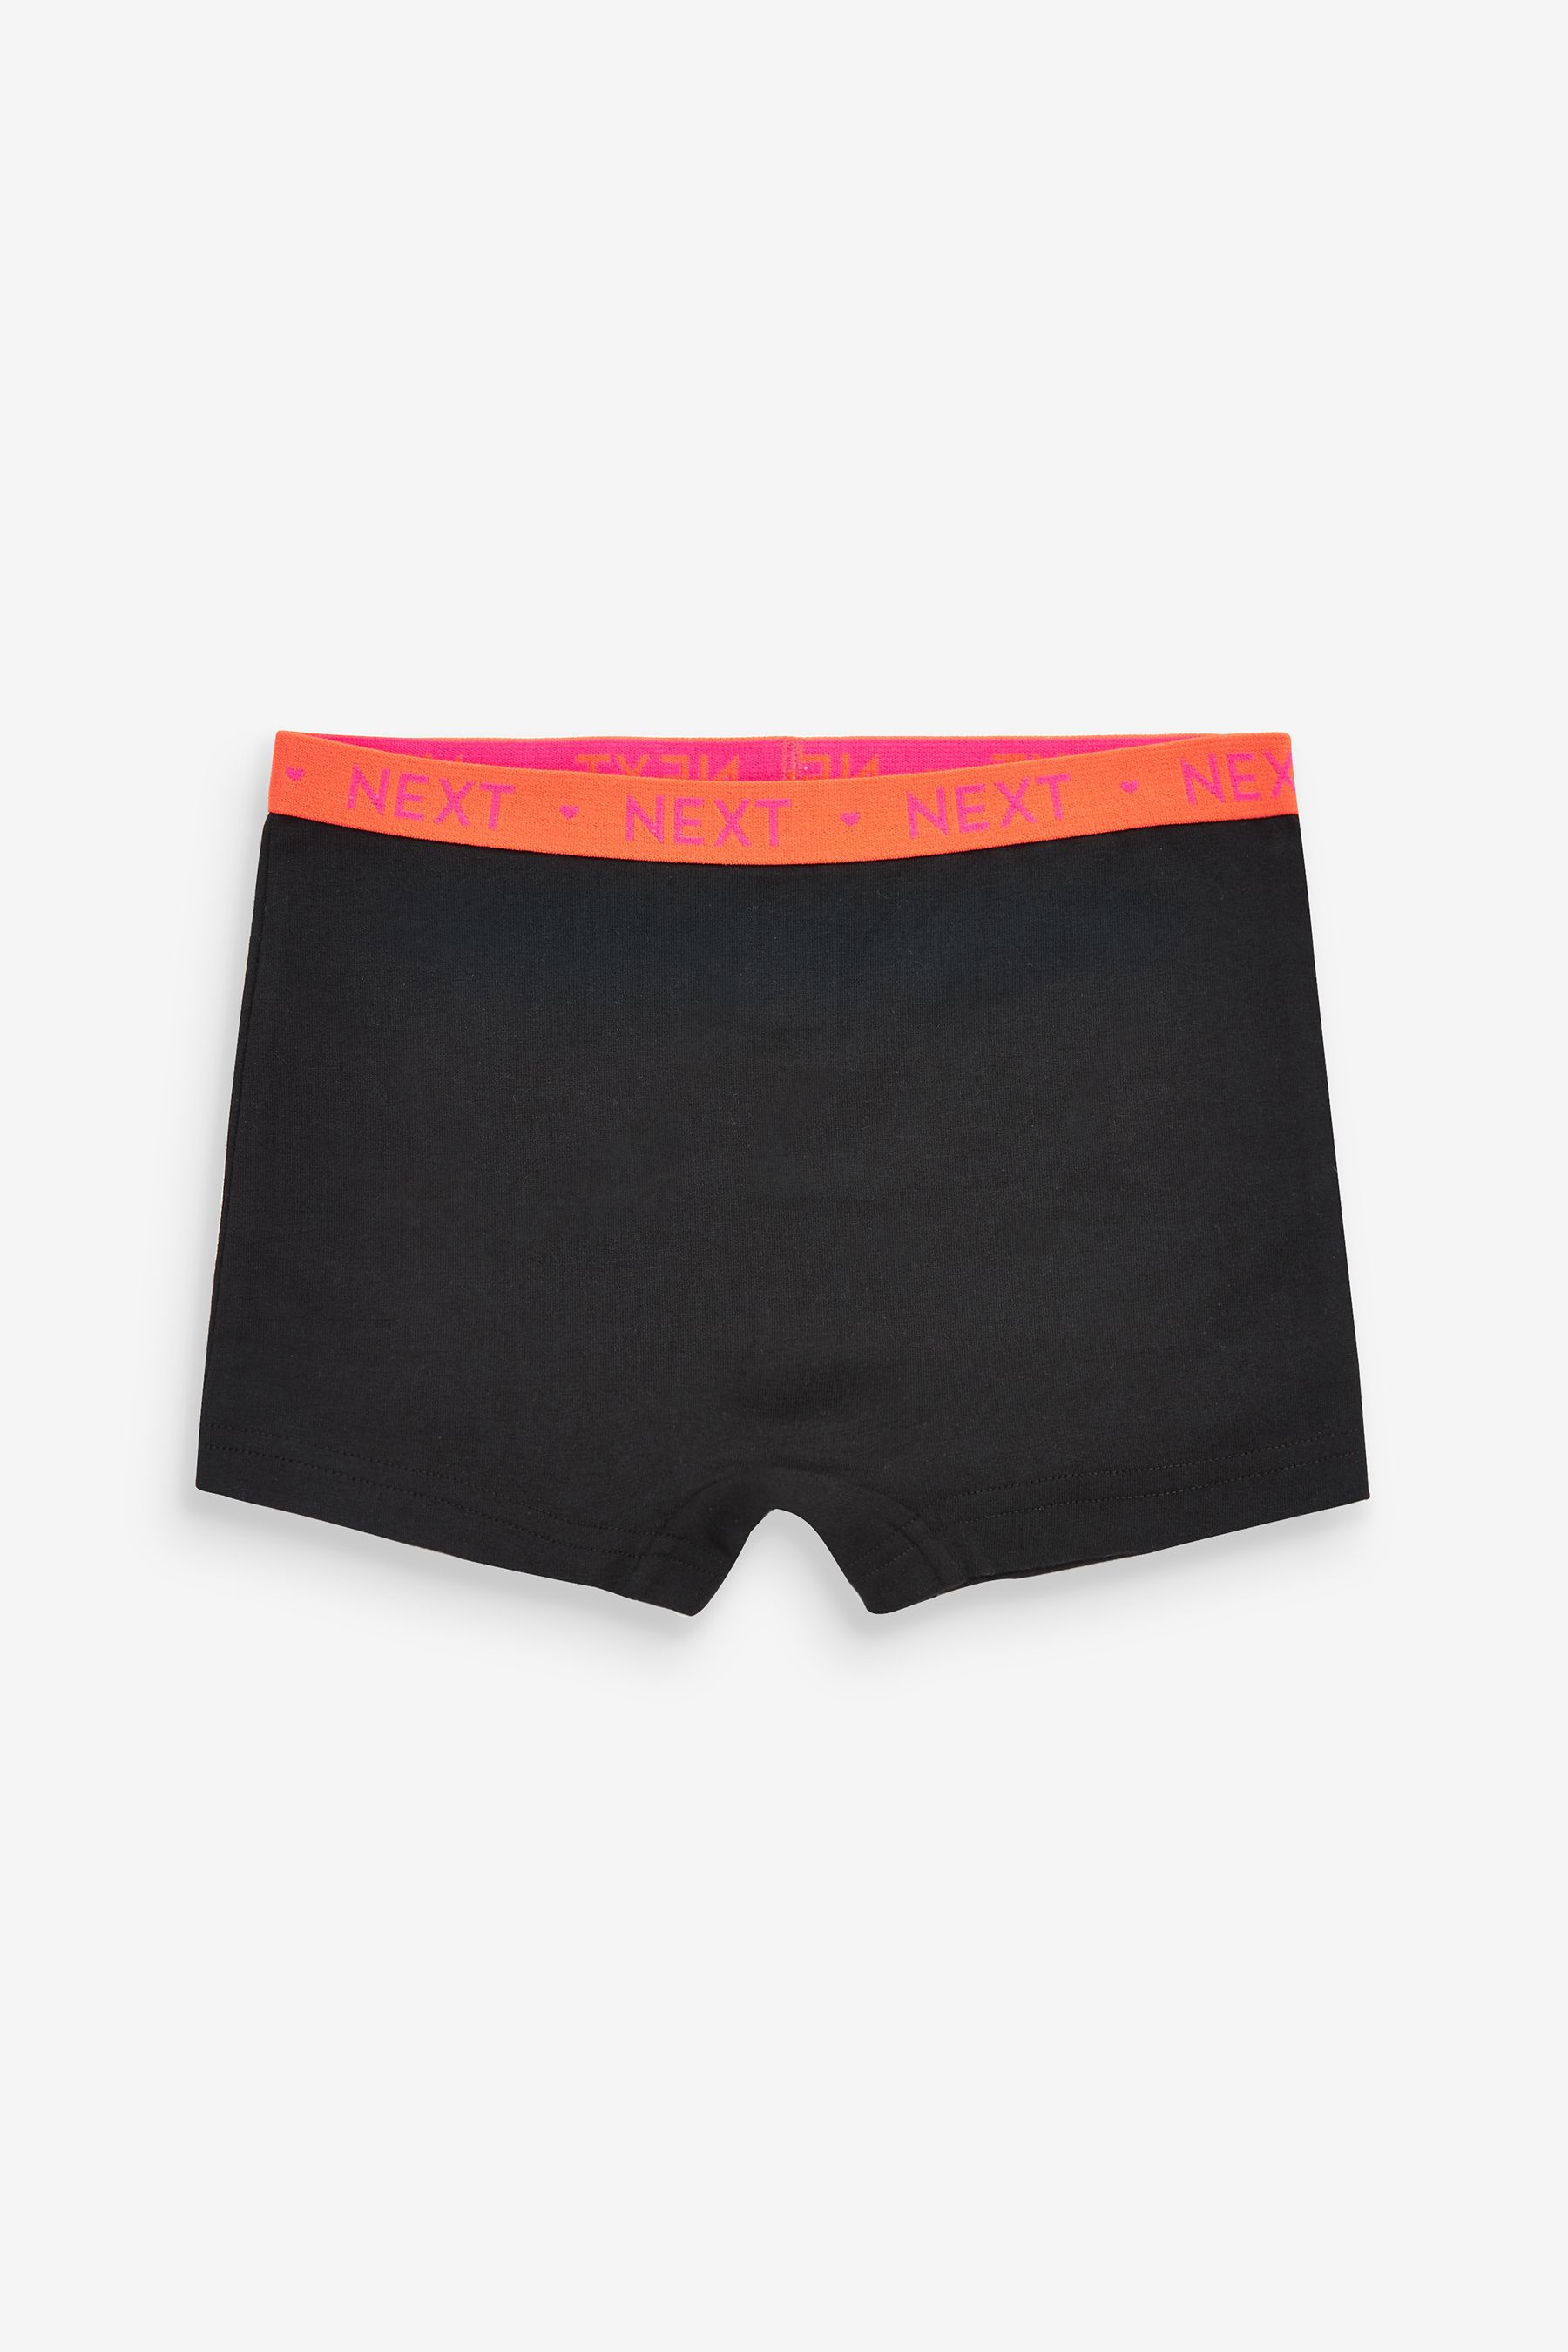 Buy Black with Bright Elastic Shorts 5 Pack (2-16 سنة) from Next Bahrain